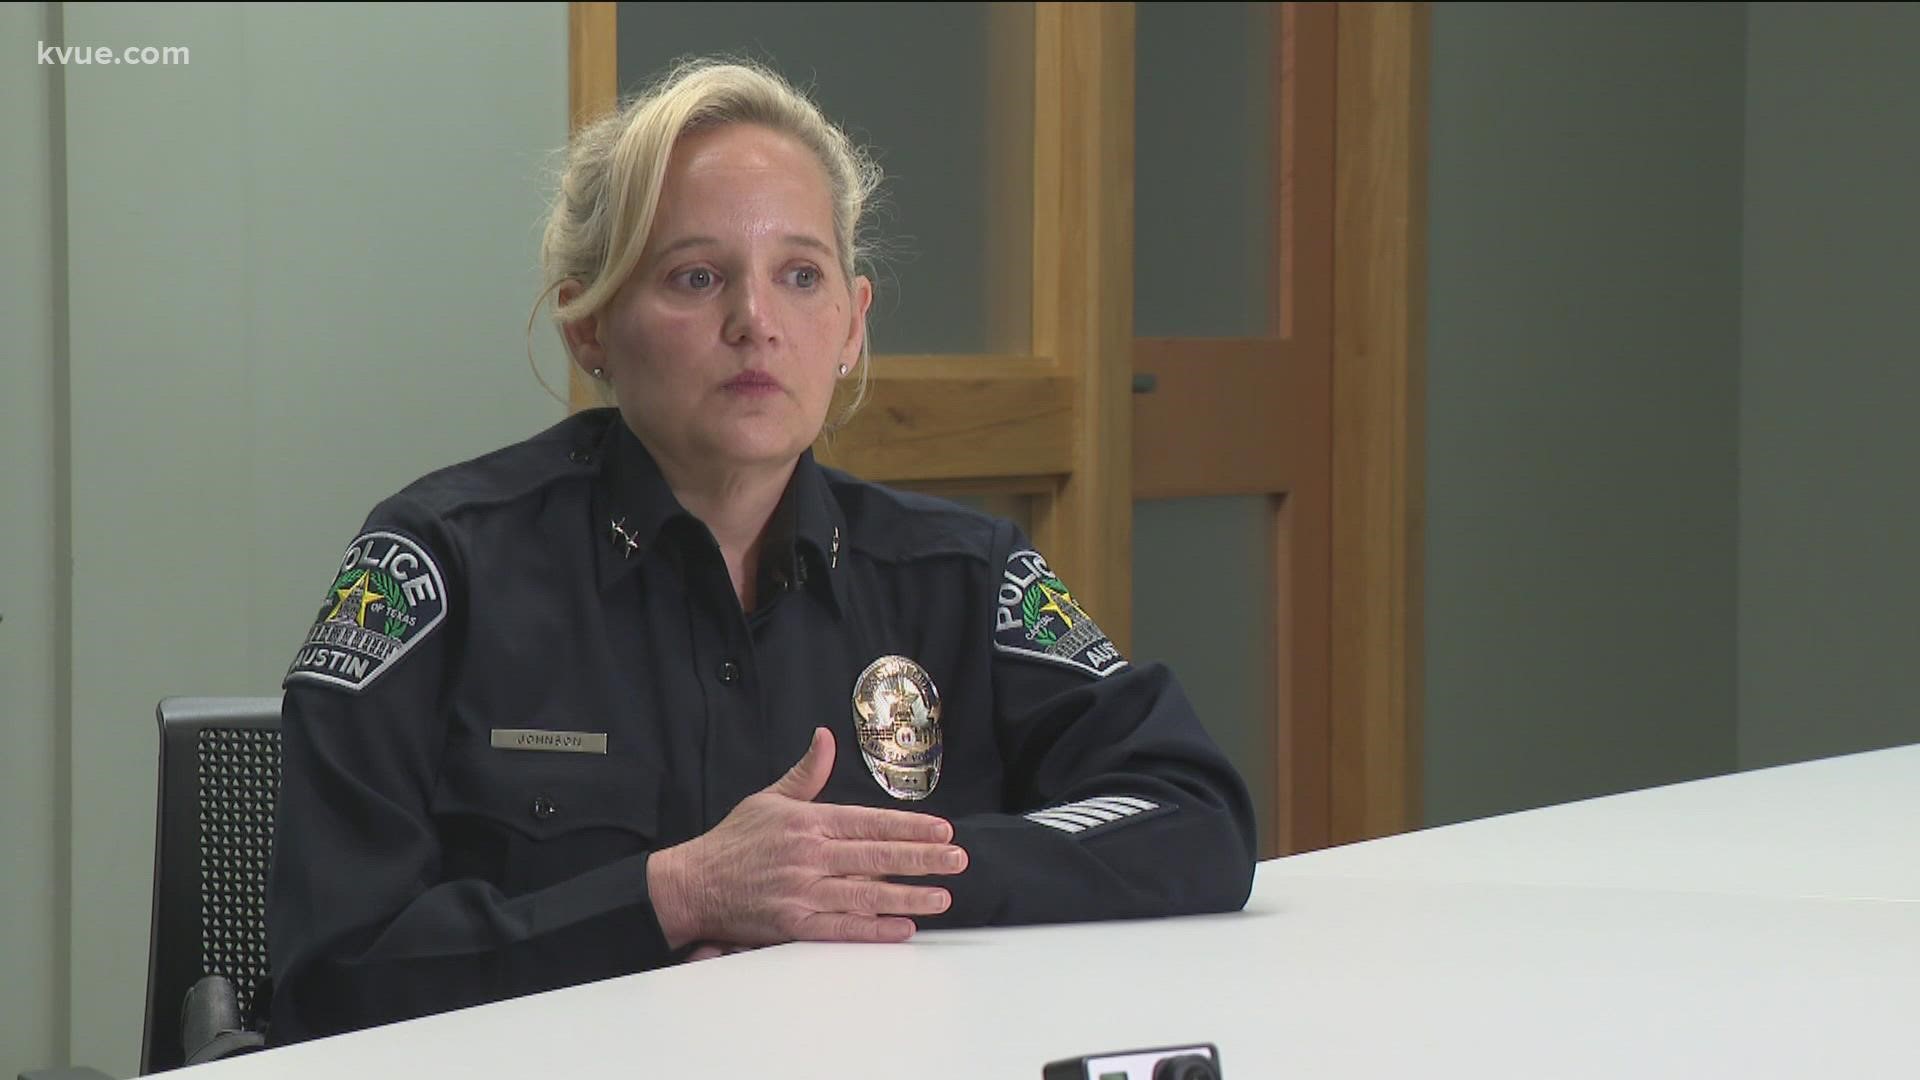 The Austin Police Department has pledged to hire more female officers. It's part of a nationwide push to increase representation of women in policing.